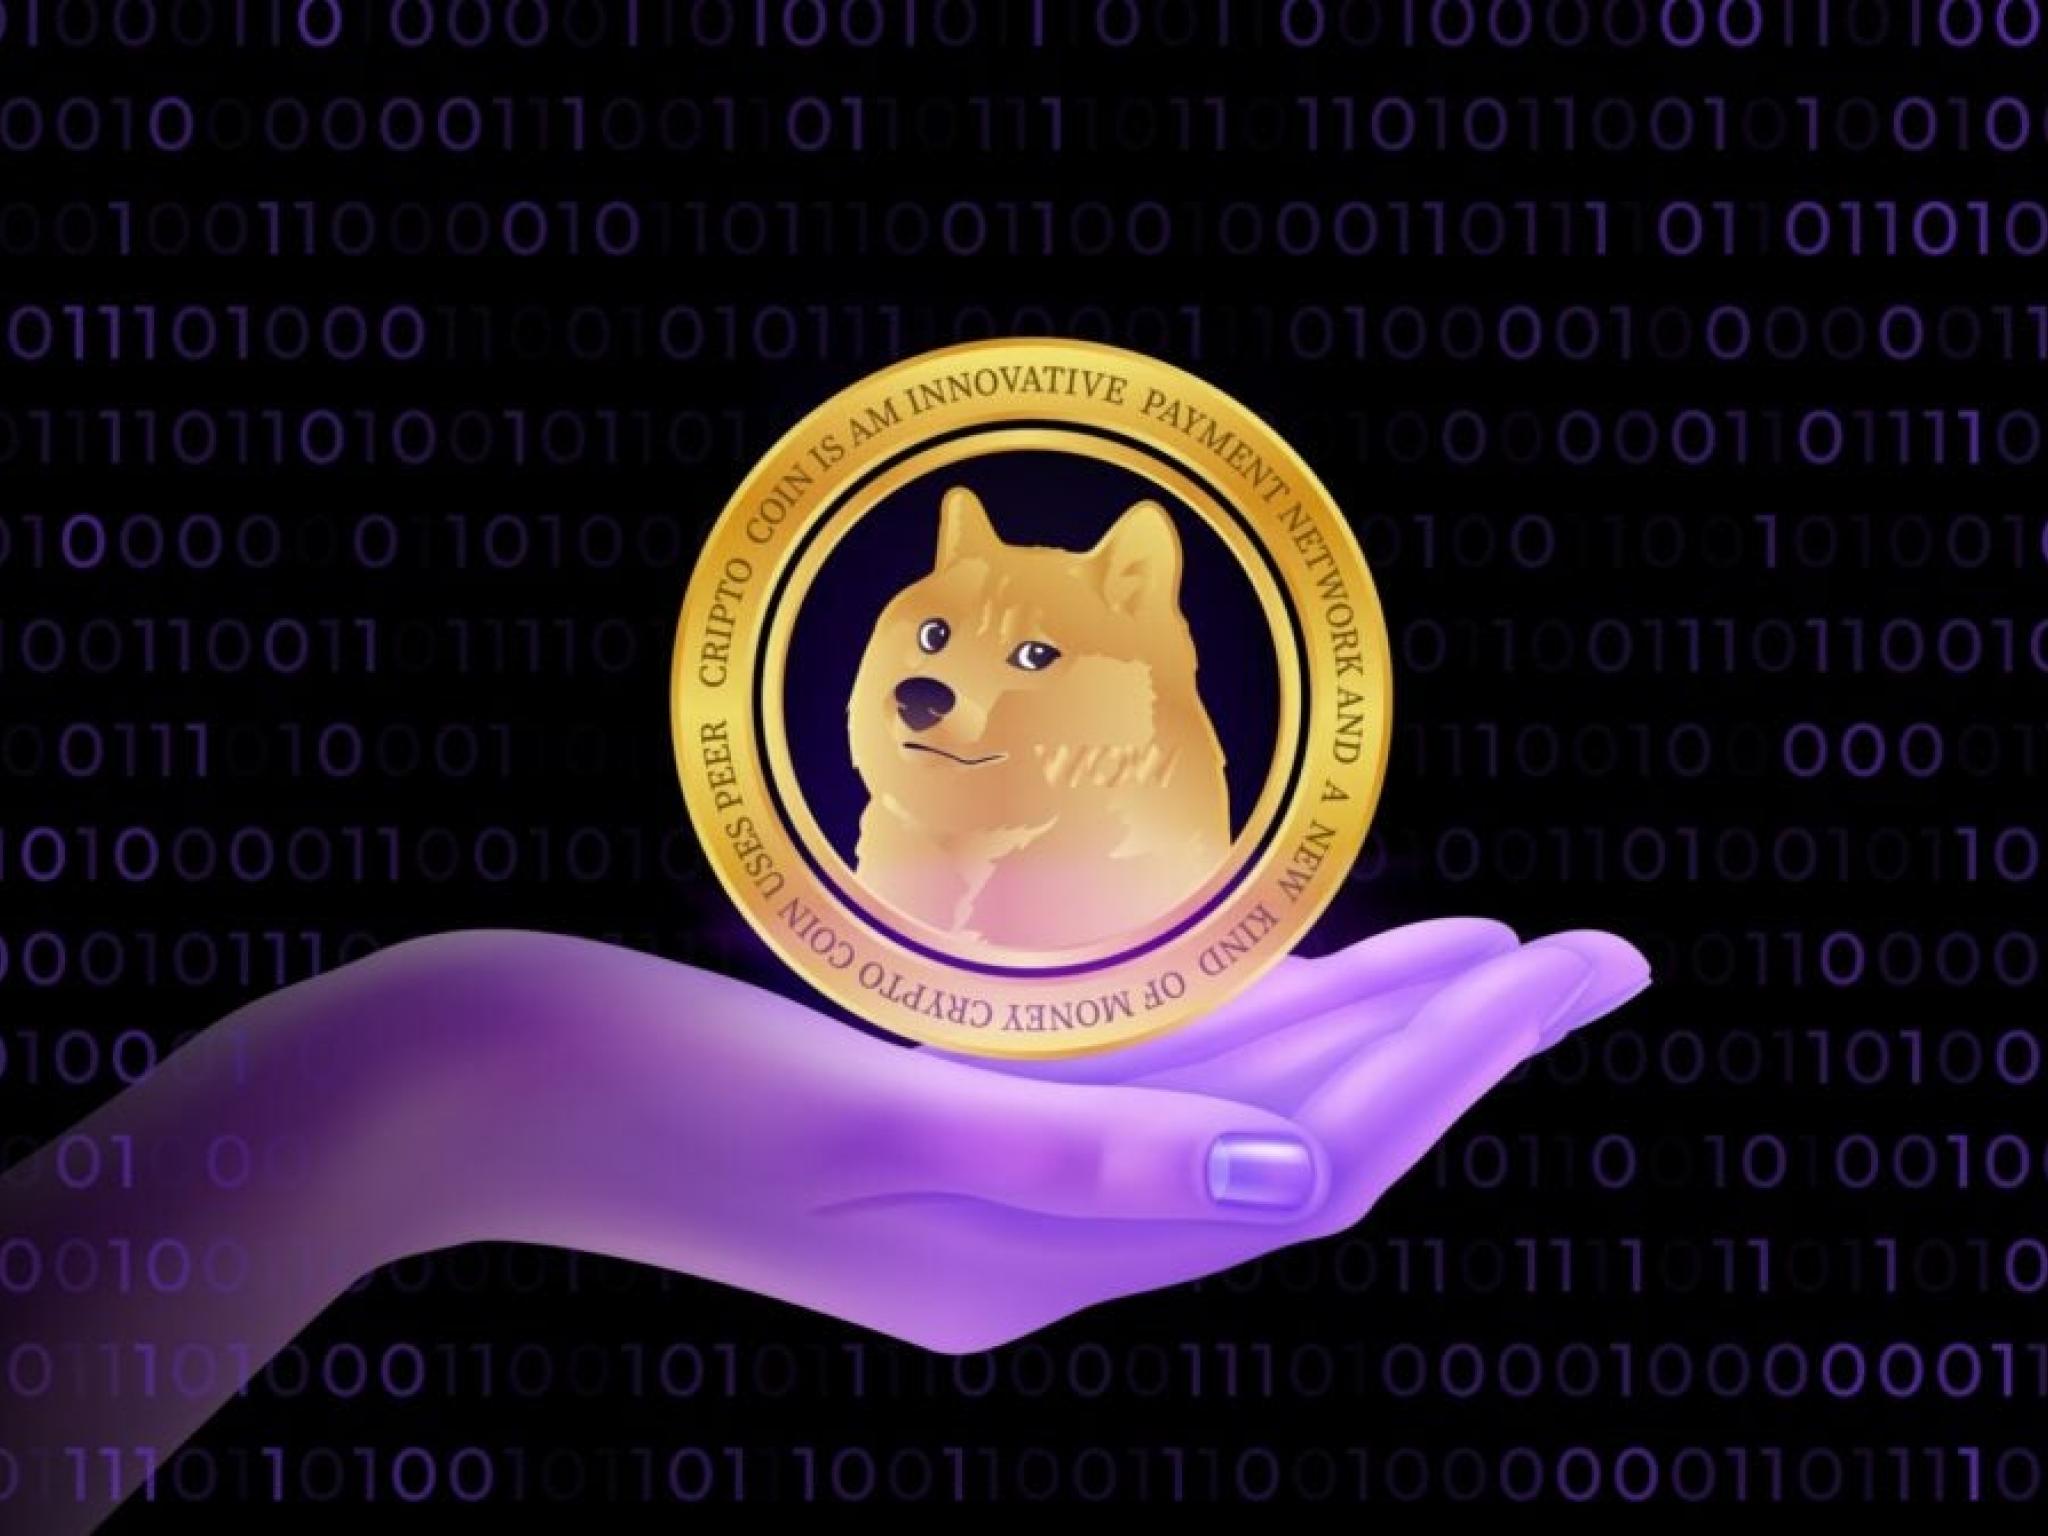  will-dogecoins-price-discovery-follow-bitcoin-like-it-did-historically 